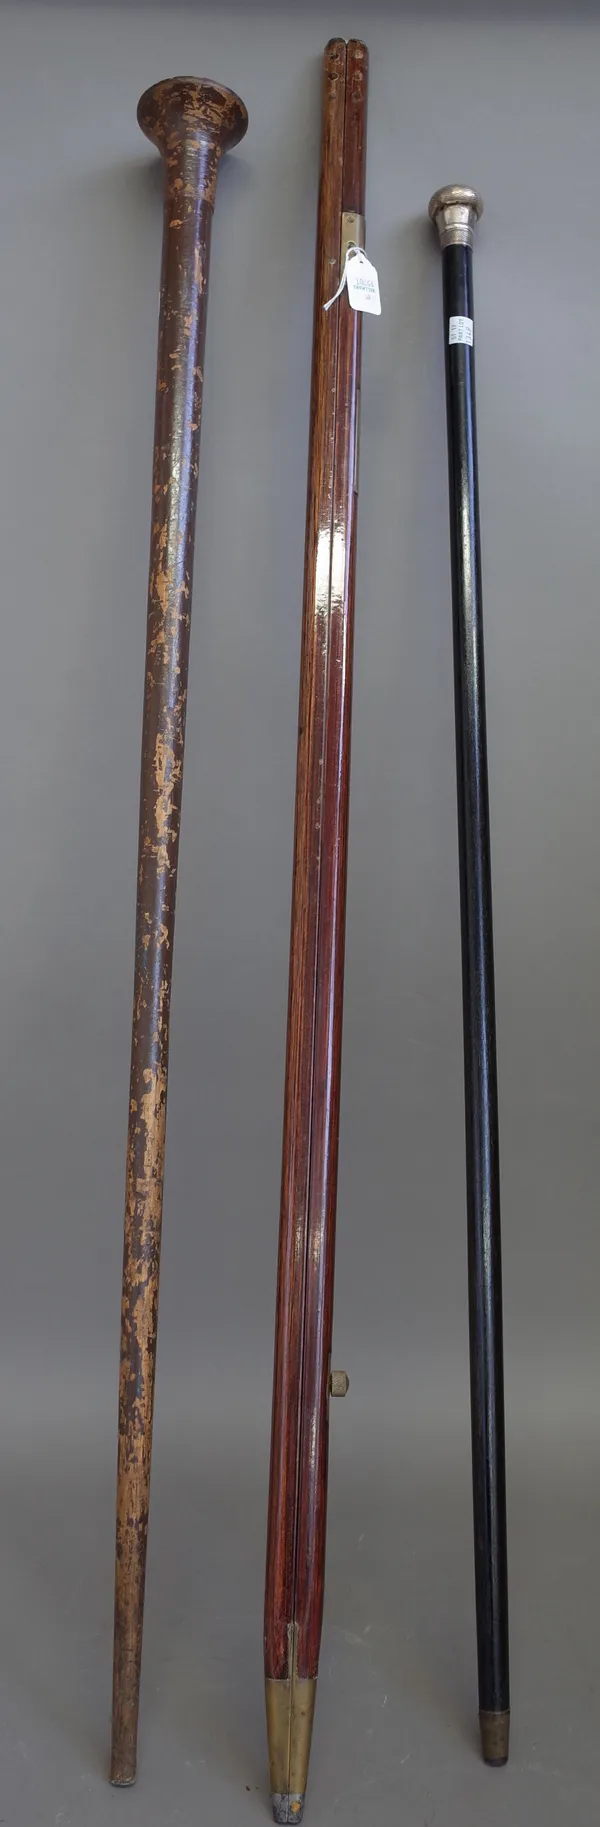 A hardwood and brass mounted yard measure (102cm), a silver mounted ebonised walking cane, a West Sussex Constabulary 'Billy stick' or baton and three